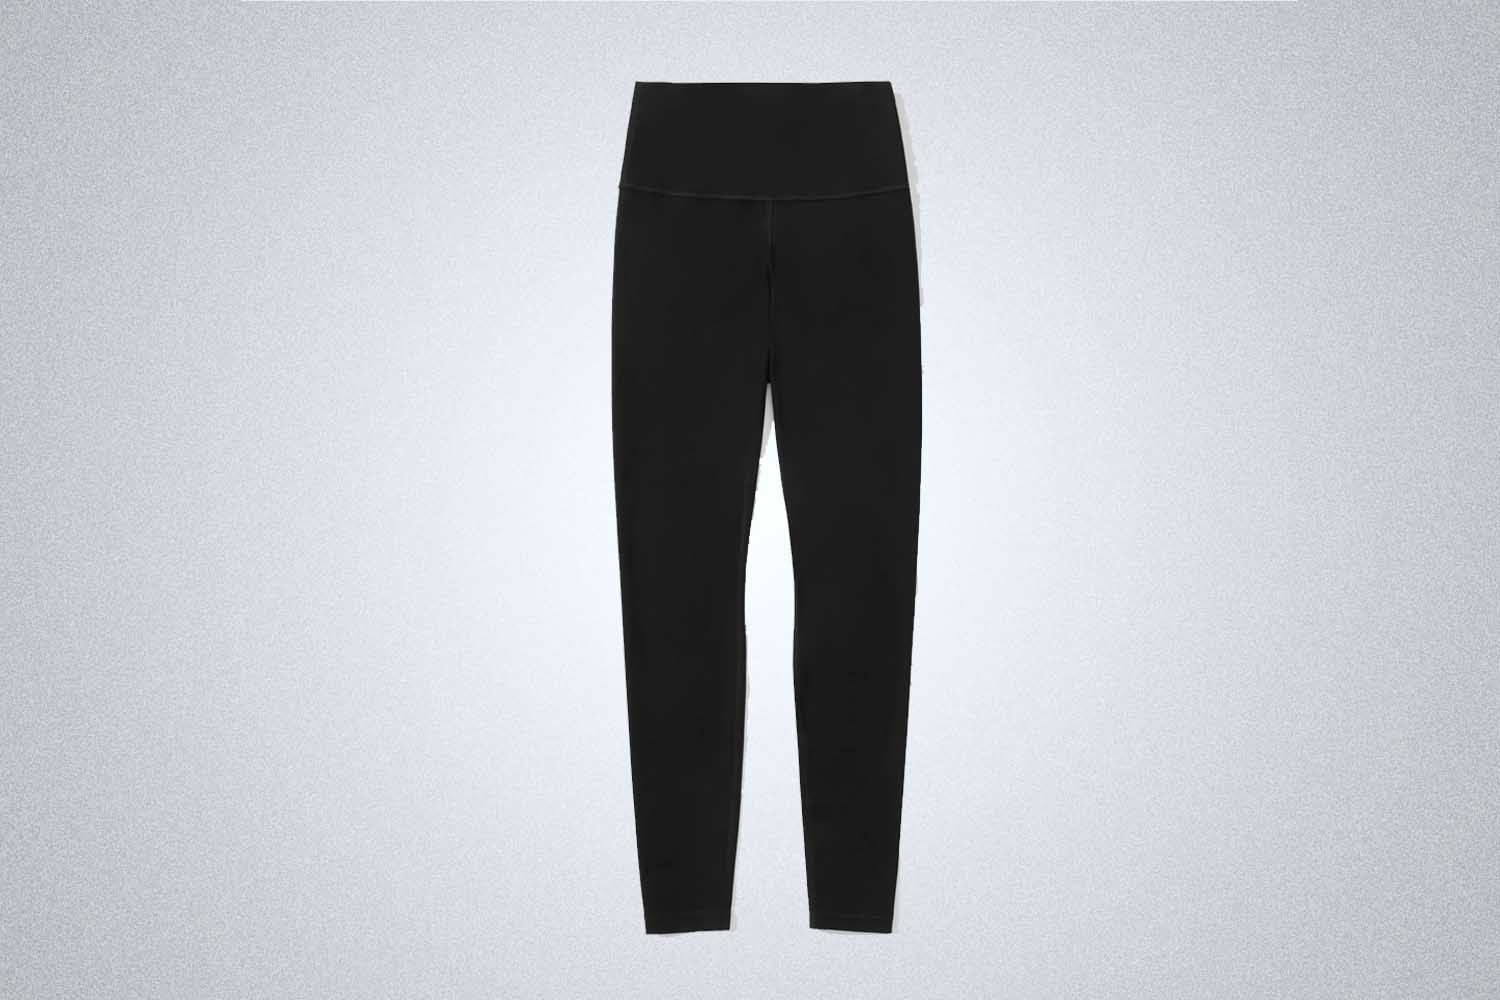 The Perform Legging by Everlane